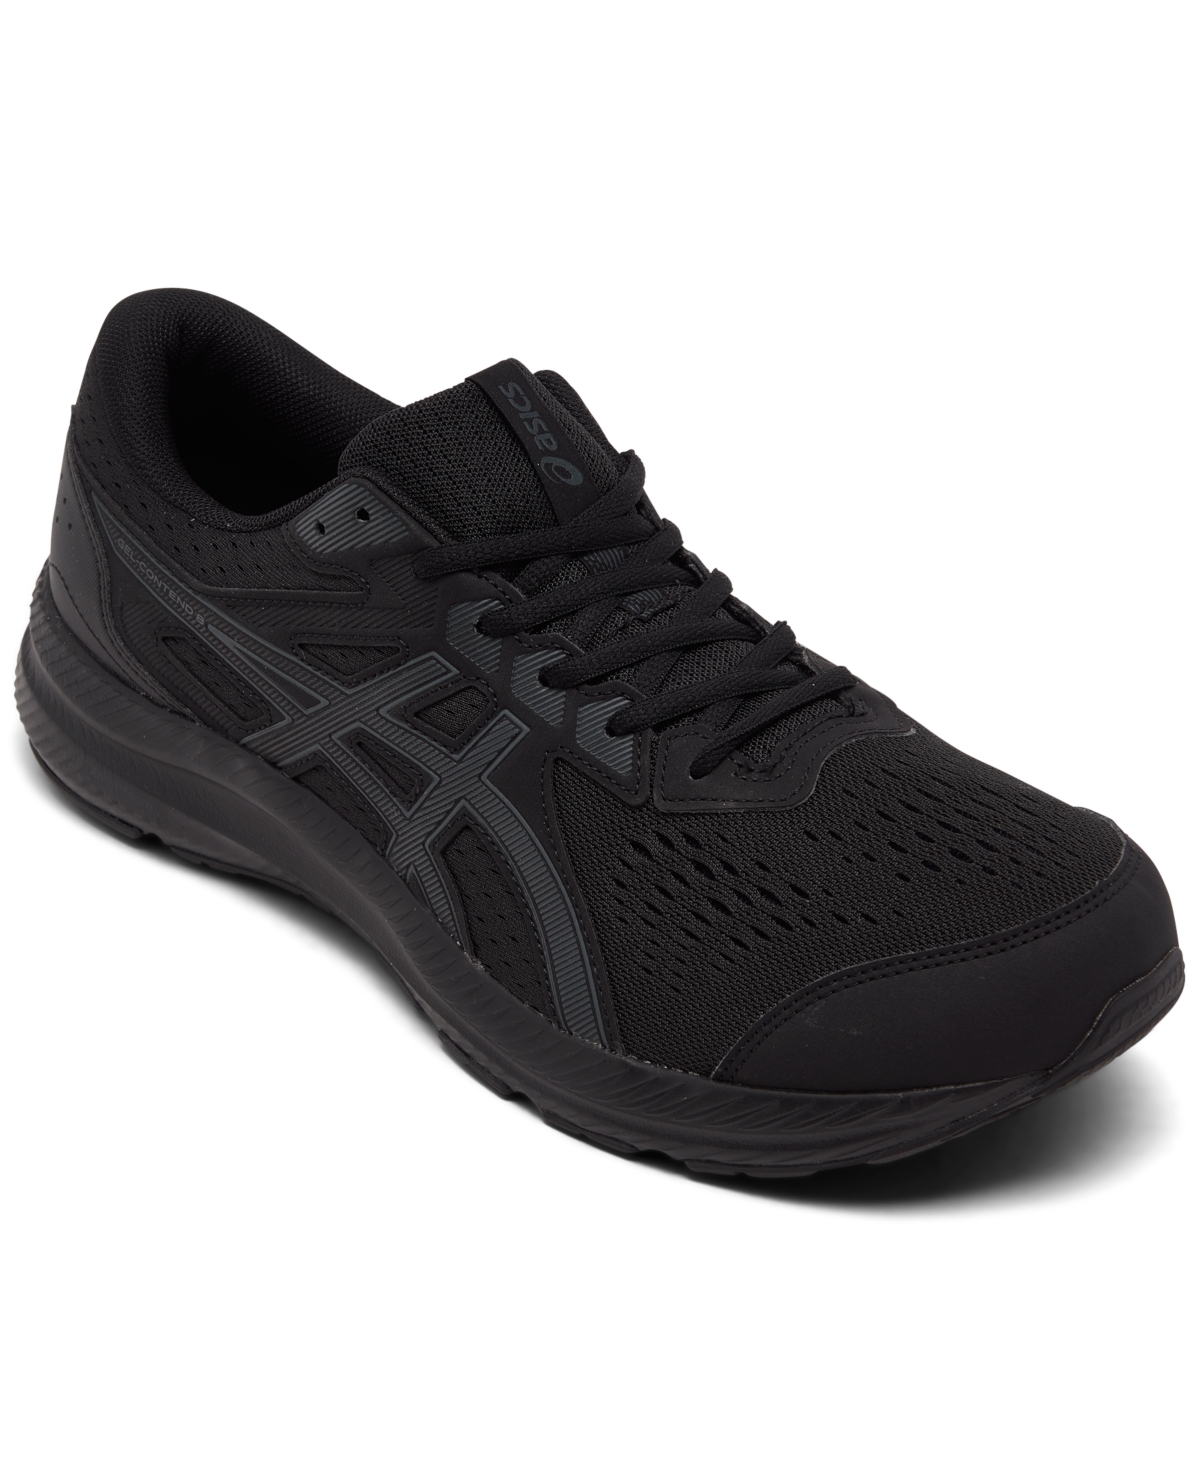 ASICS MEN'S GEL-CONTEND 8 RUNNING SNEAKERS FROM FINISH LINE